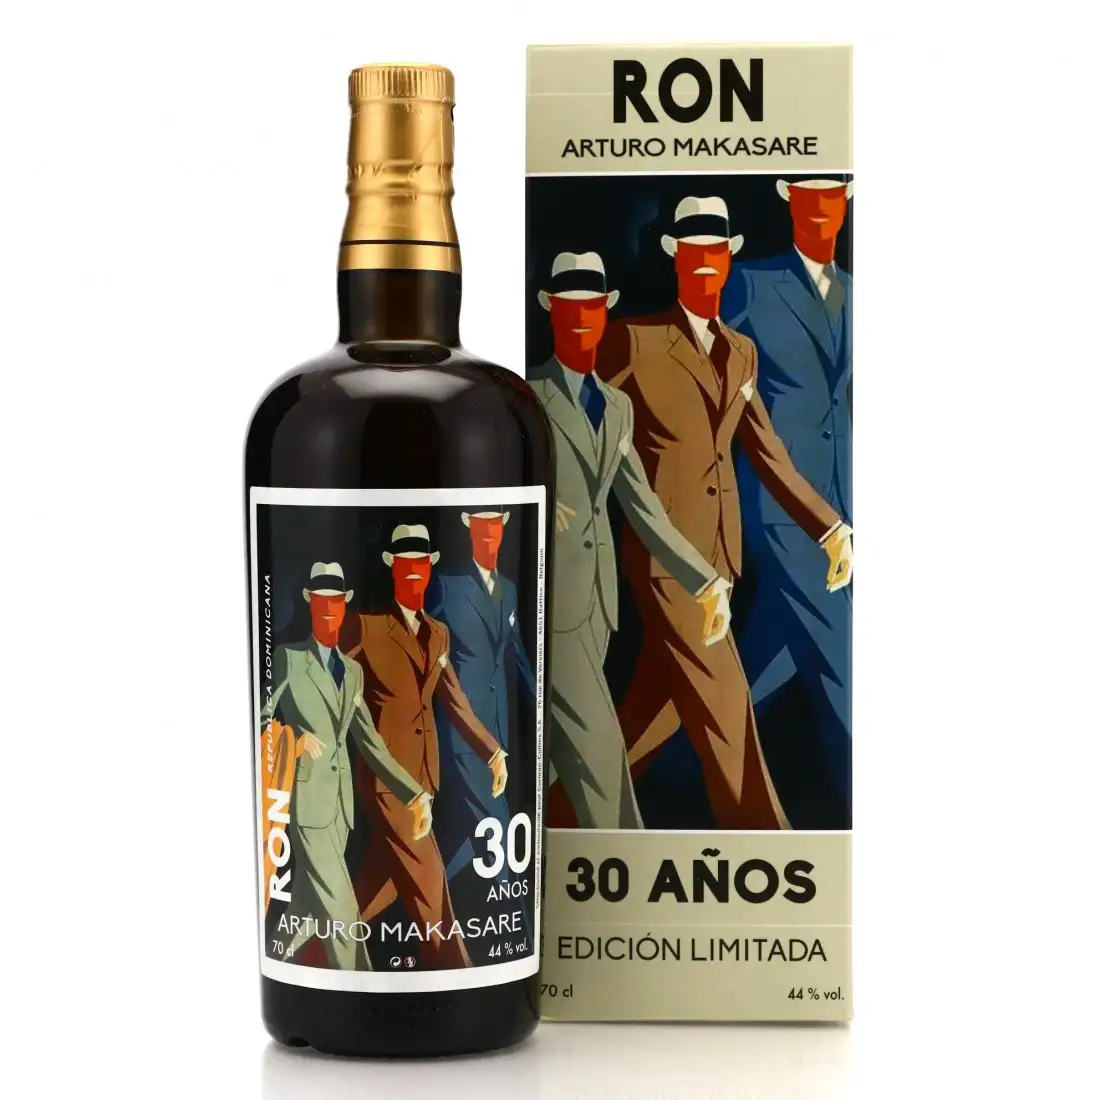 Dominican Republic Rum Ratings - Find the Best Rums with RumX | RumX